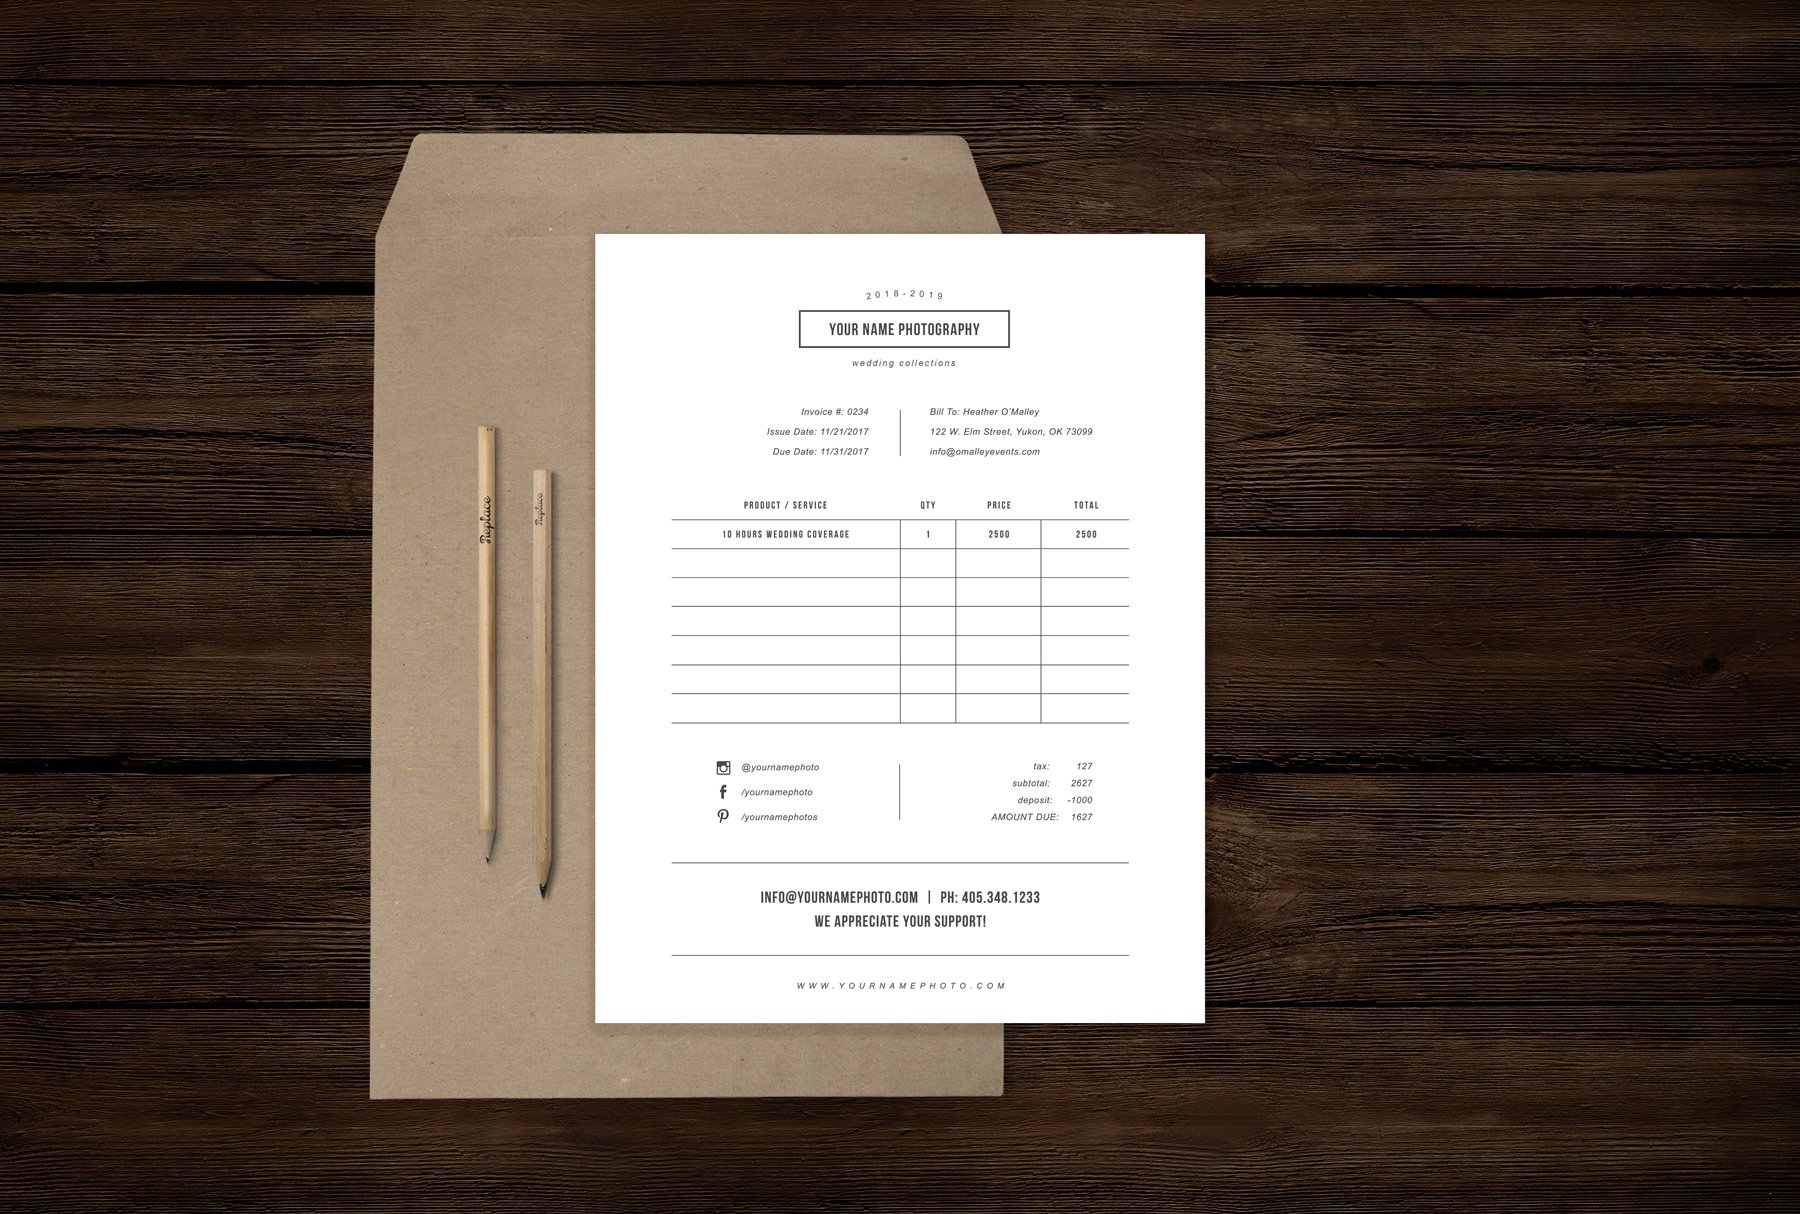 Photography Forms - Receipt Template cover image.